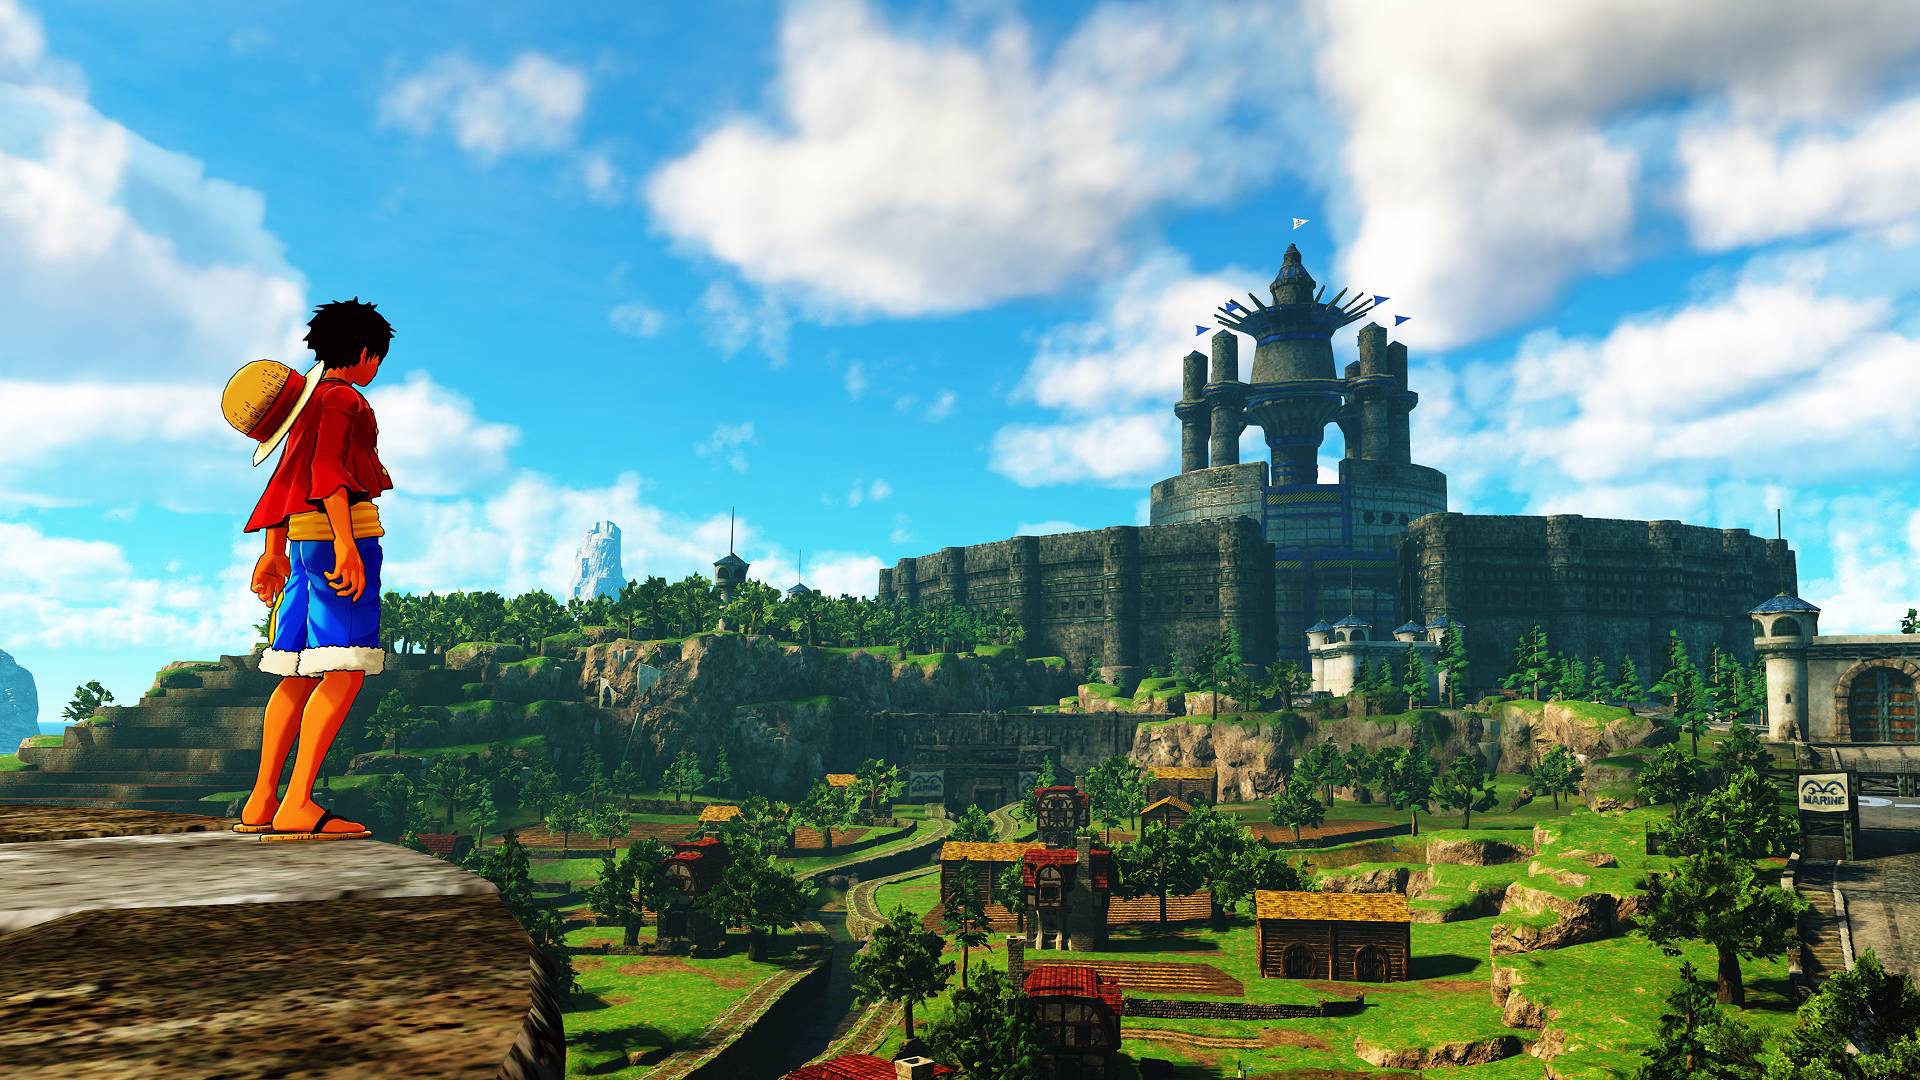 One Piece: World Seeker - The Unfinished Map Box Shot for PC - GameFAQs